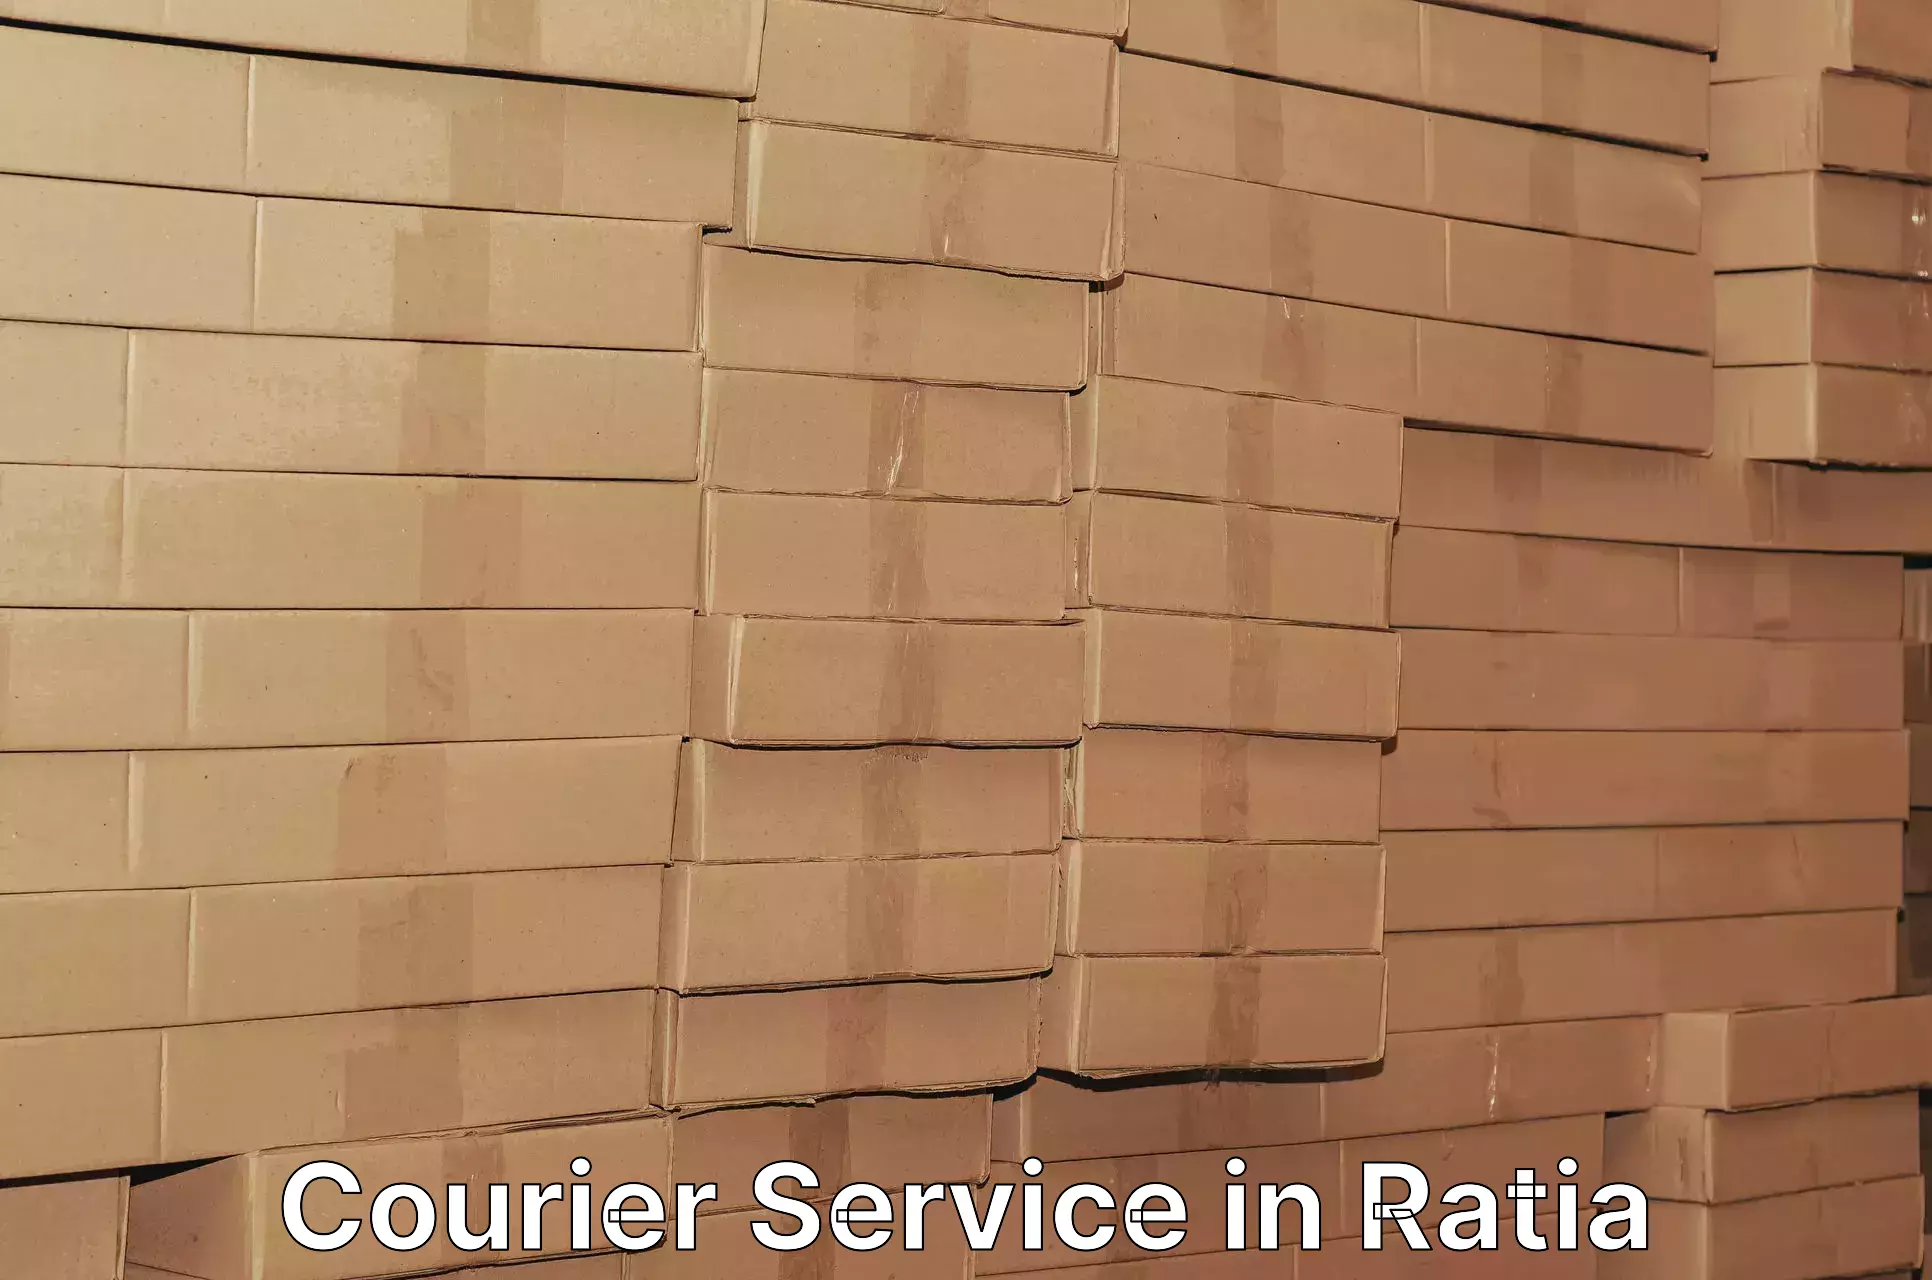 Parcel handling and care in Ratia